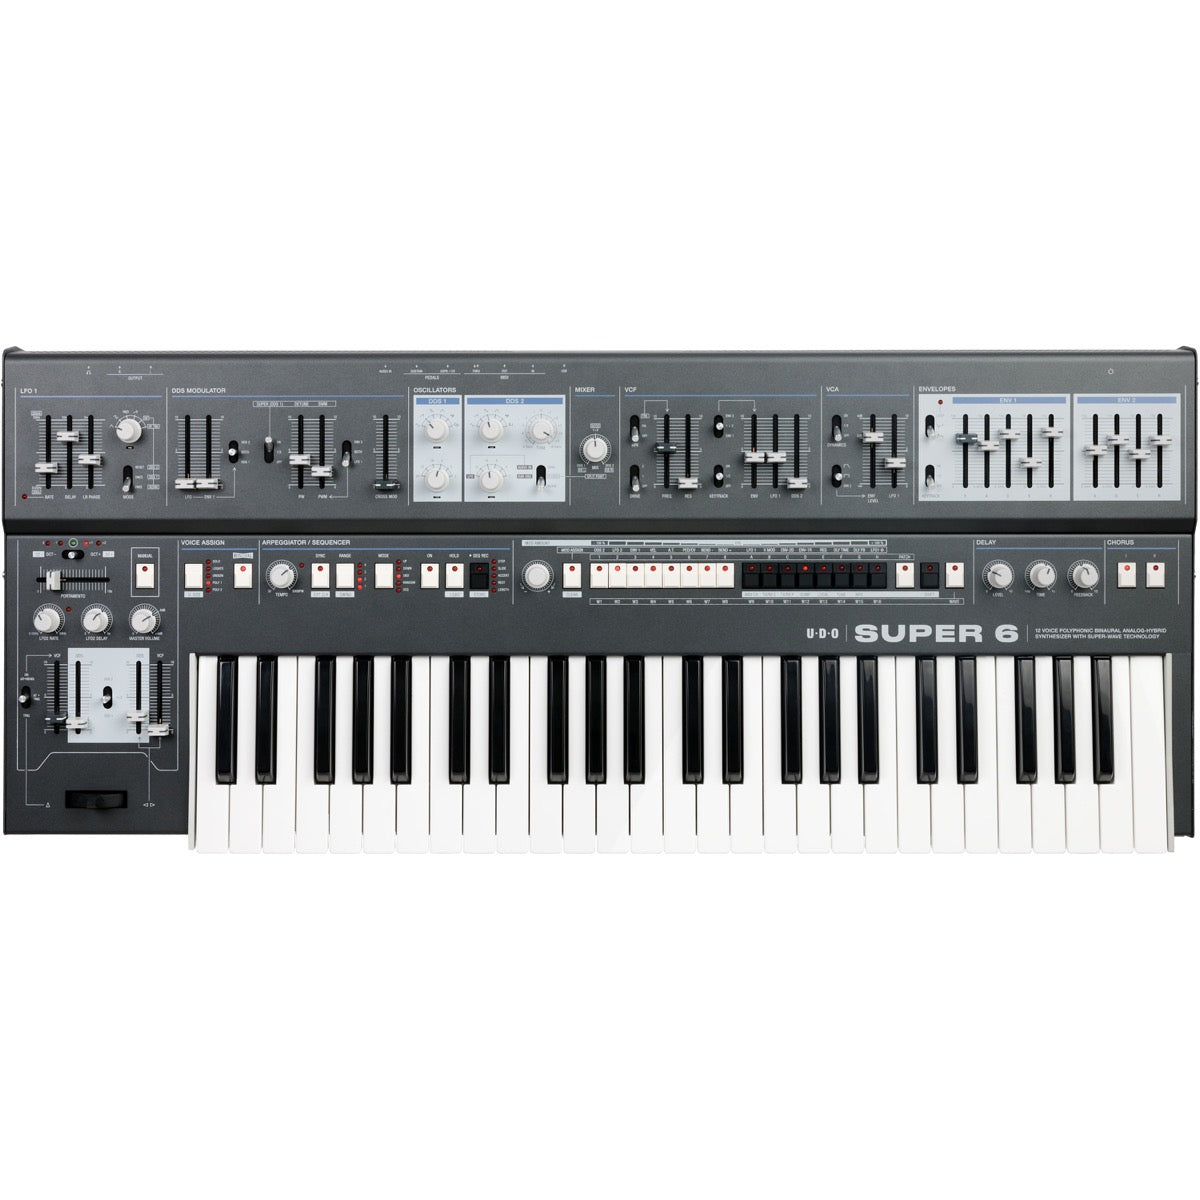 UDO Audio Super 6 12-Voice Polyphonic Keyboard Synthesizer - Black View 1